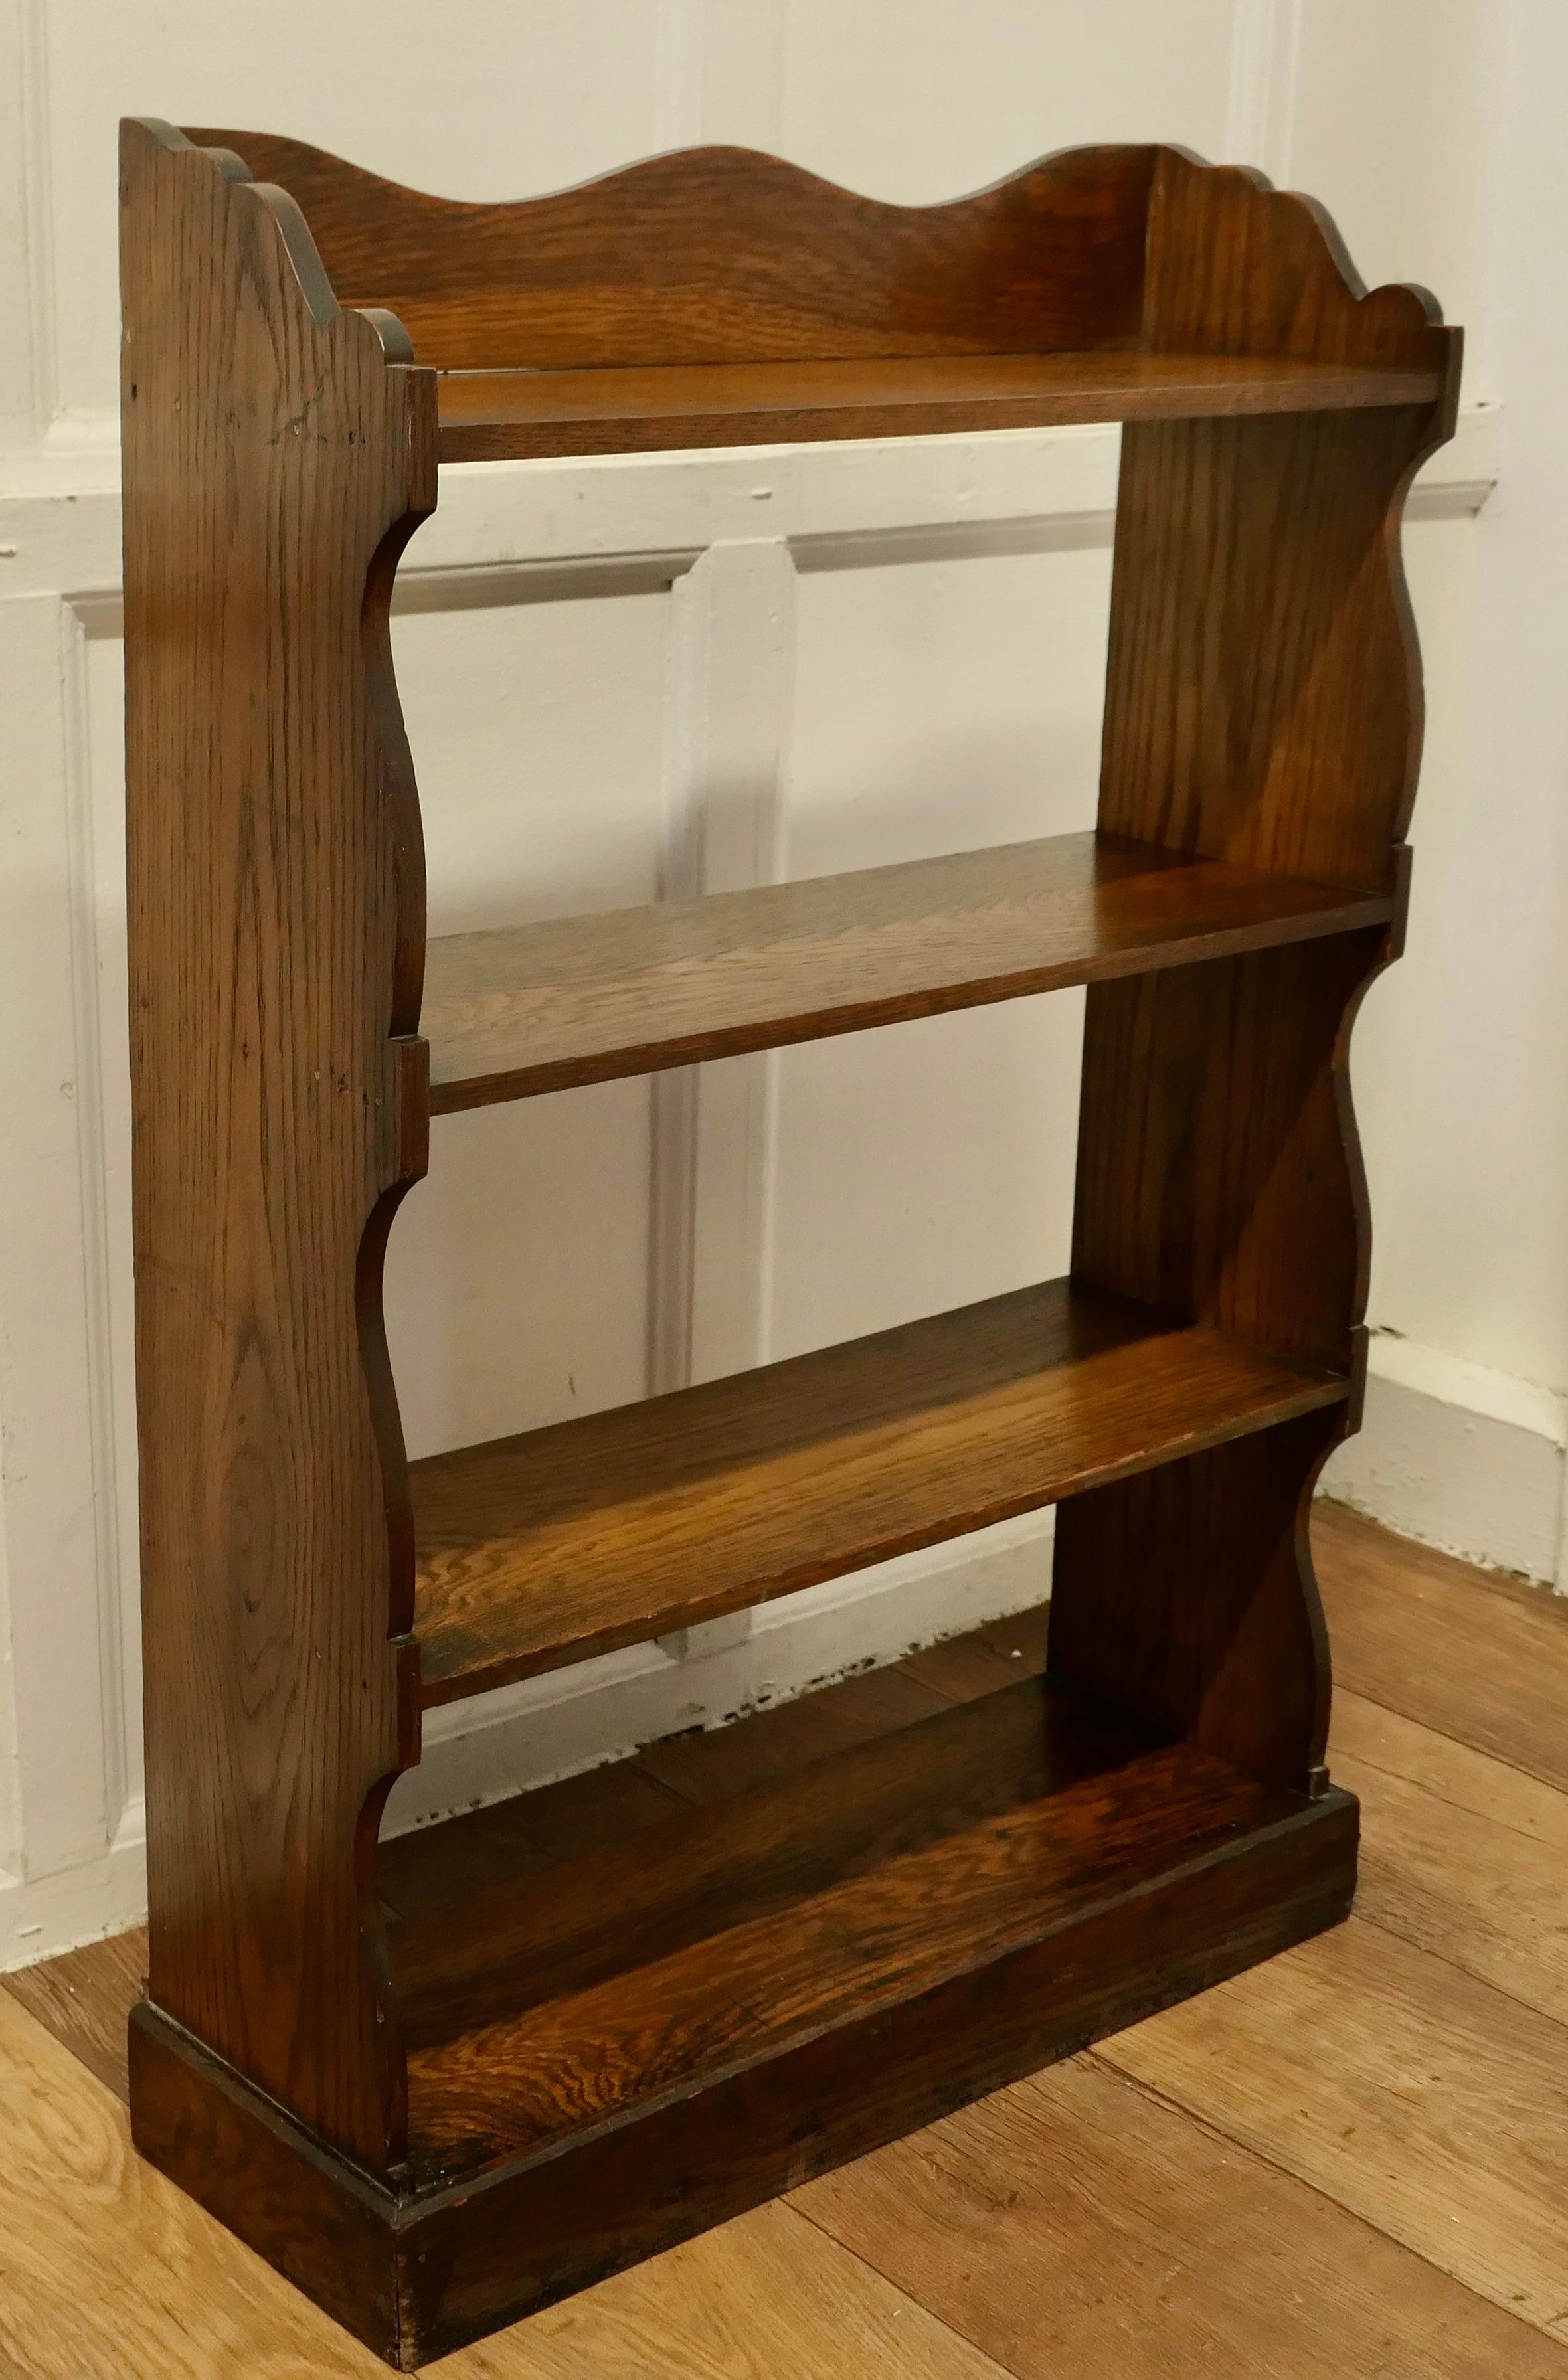 Arts and Crafts Oak Open Front Bookcase.

This Oak bookcase has 4 open shelves and there is a gallery around the top, all the edges of the bookcase are shapely in the arts an crafts style
The bookcase is in good attractive sturdy condition and would